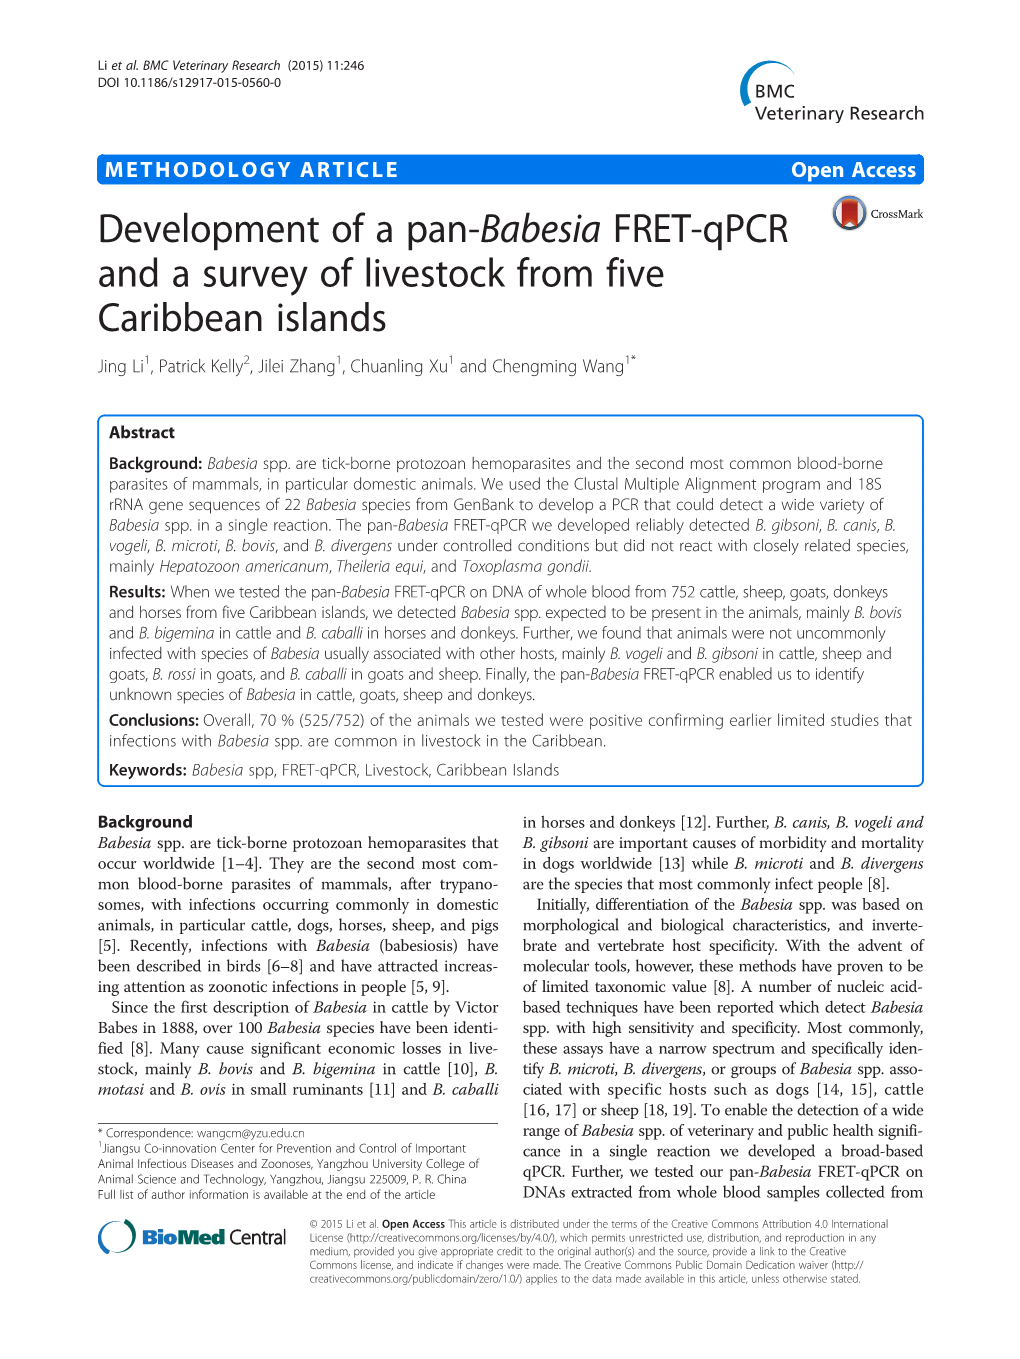 Development of a Pan-Babesia FRET-Qpcr and a Survey Of